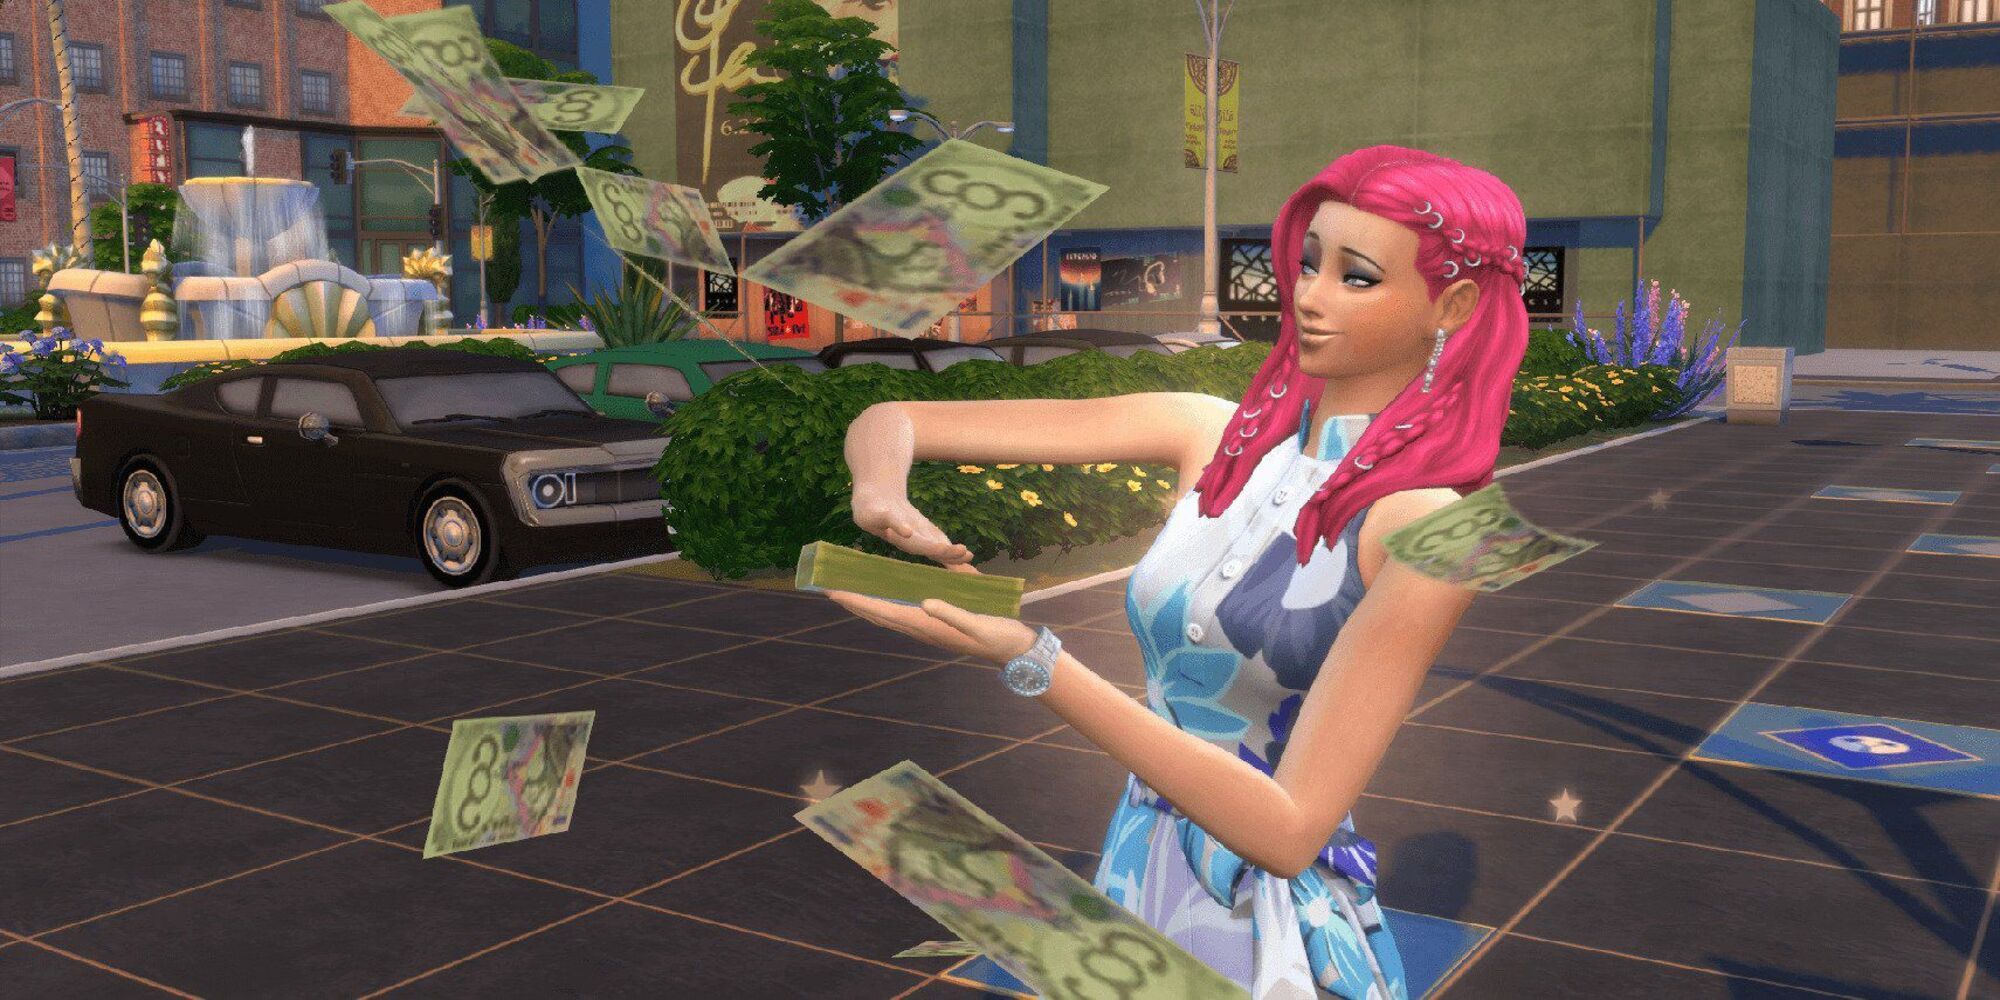 How To Make Money In Sims 4, Without Cheating